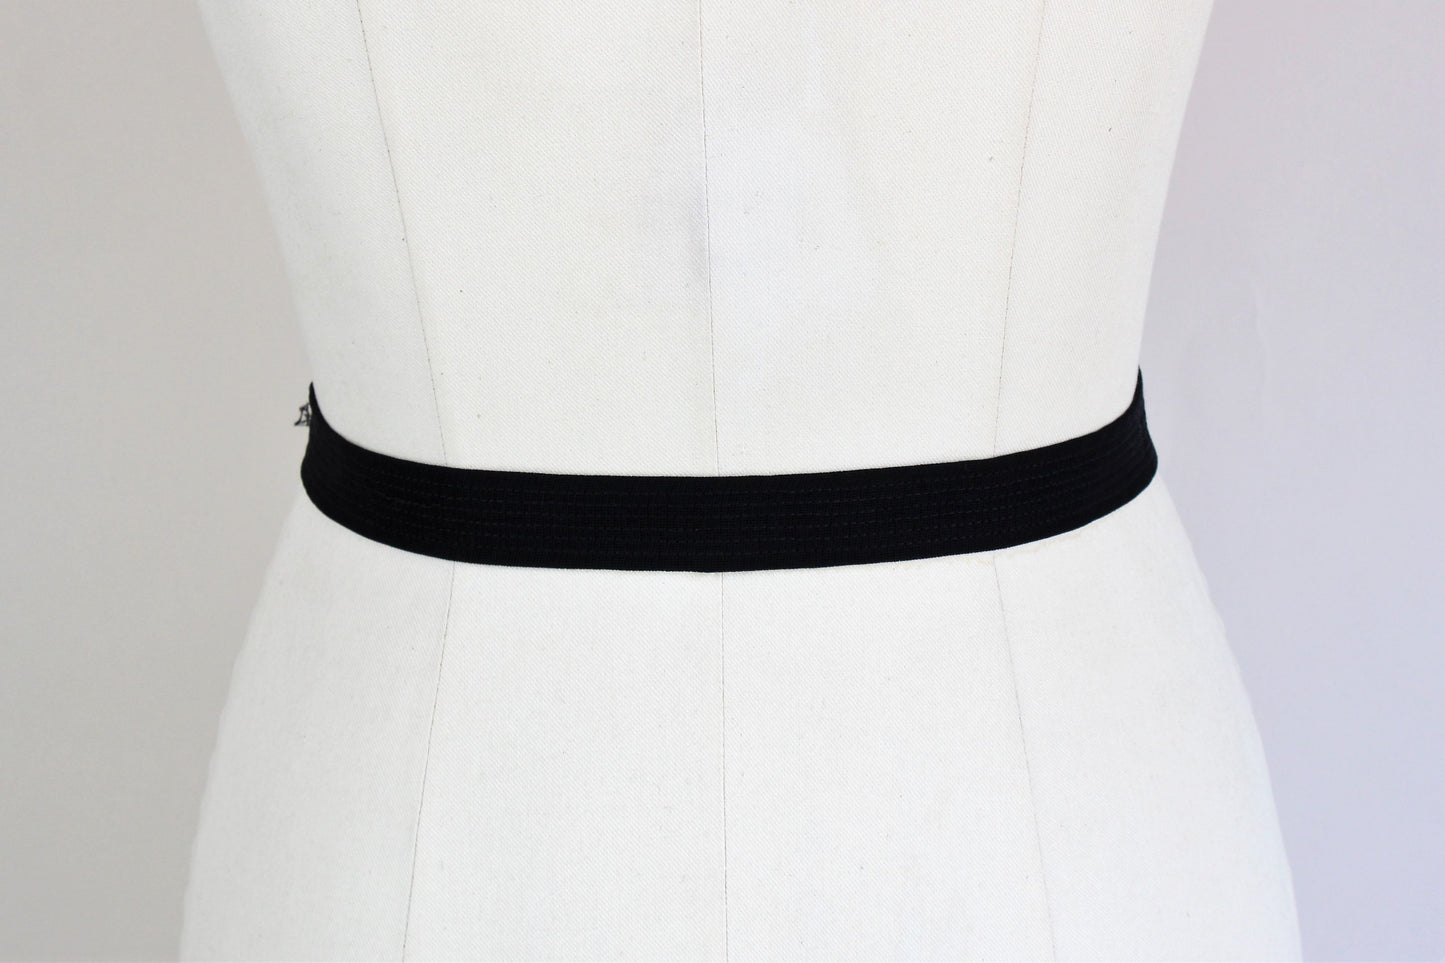 Vintage 1940s Black Rayon Belt With Buckle